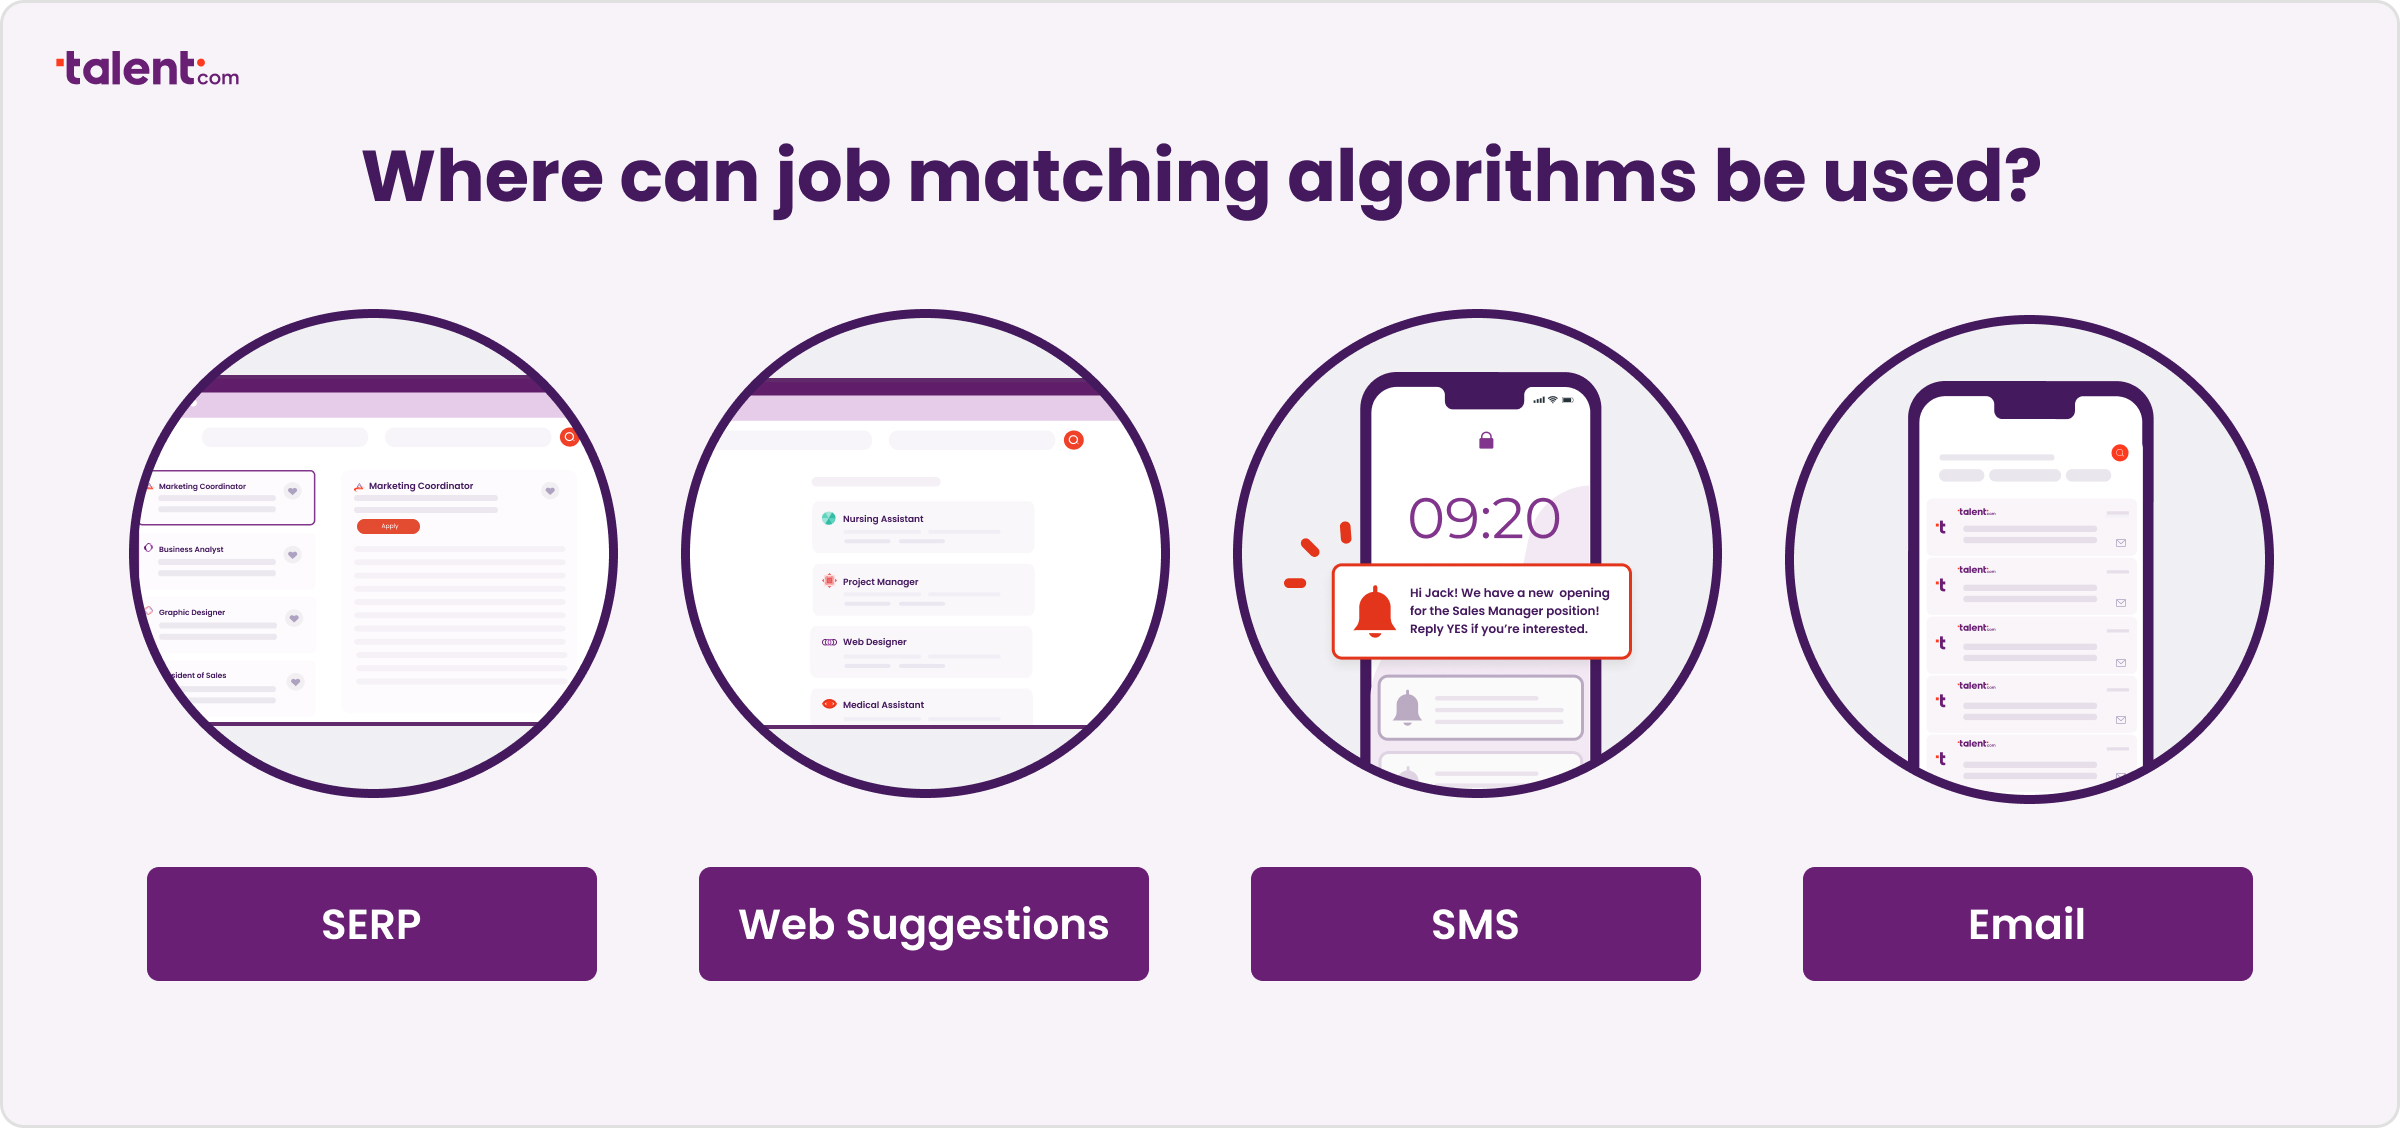 Job matching algorithms can be used in search results, web suggestions, SMS and emails.